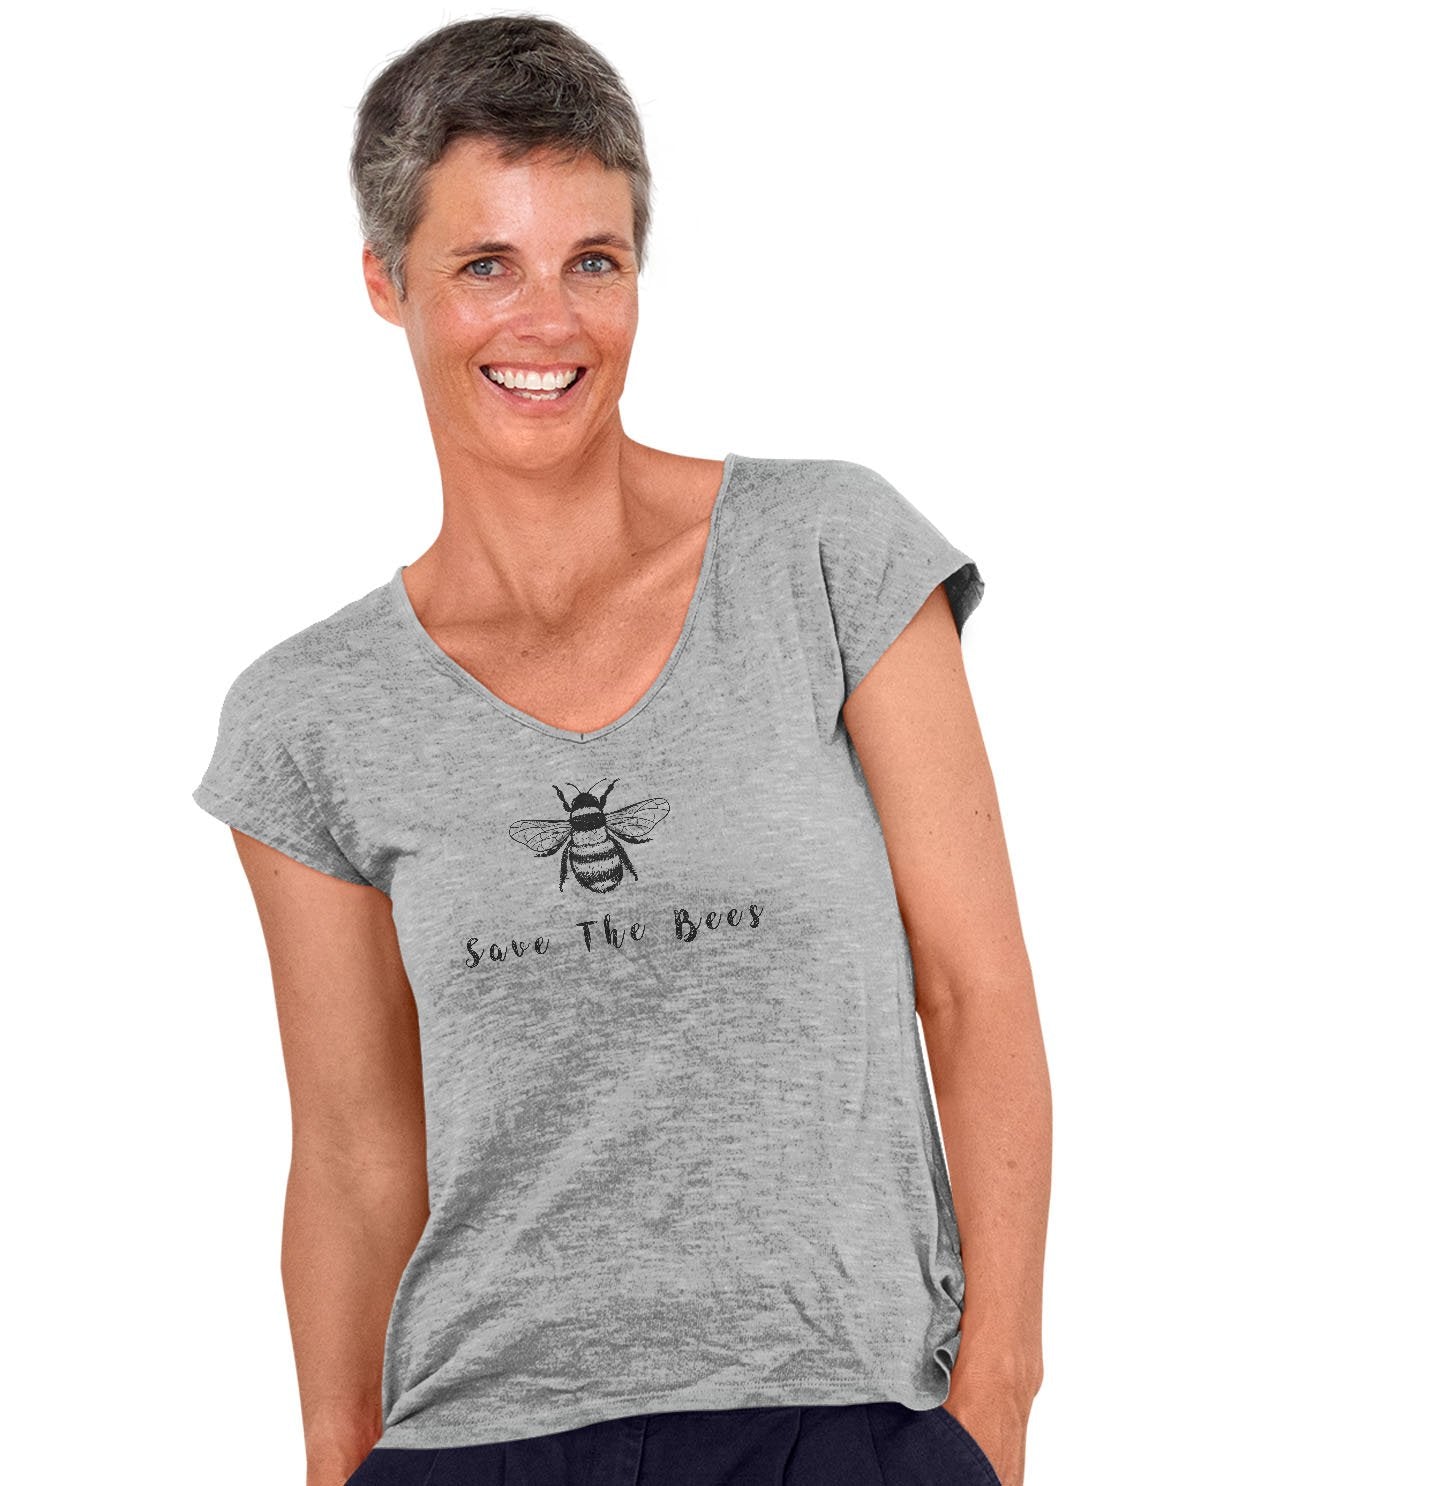 Save the Bees - Women's V-Neck T-Shirt